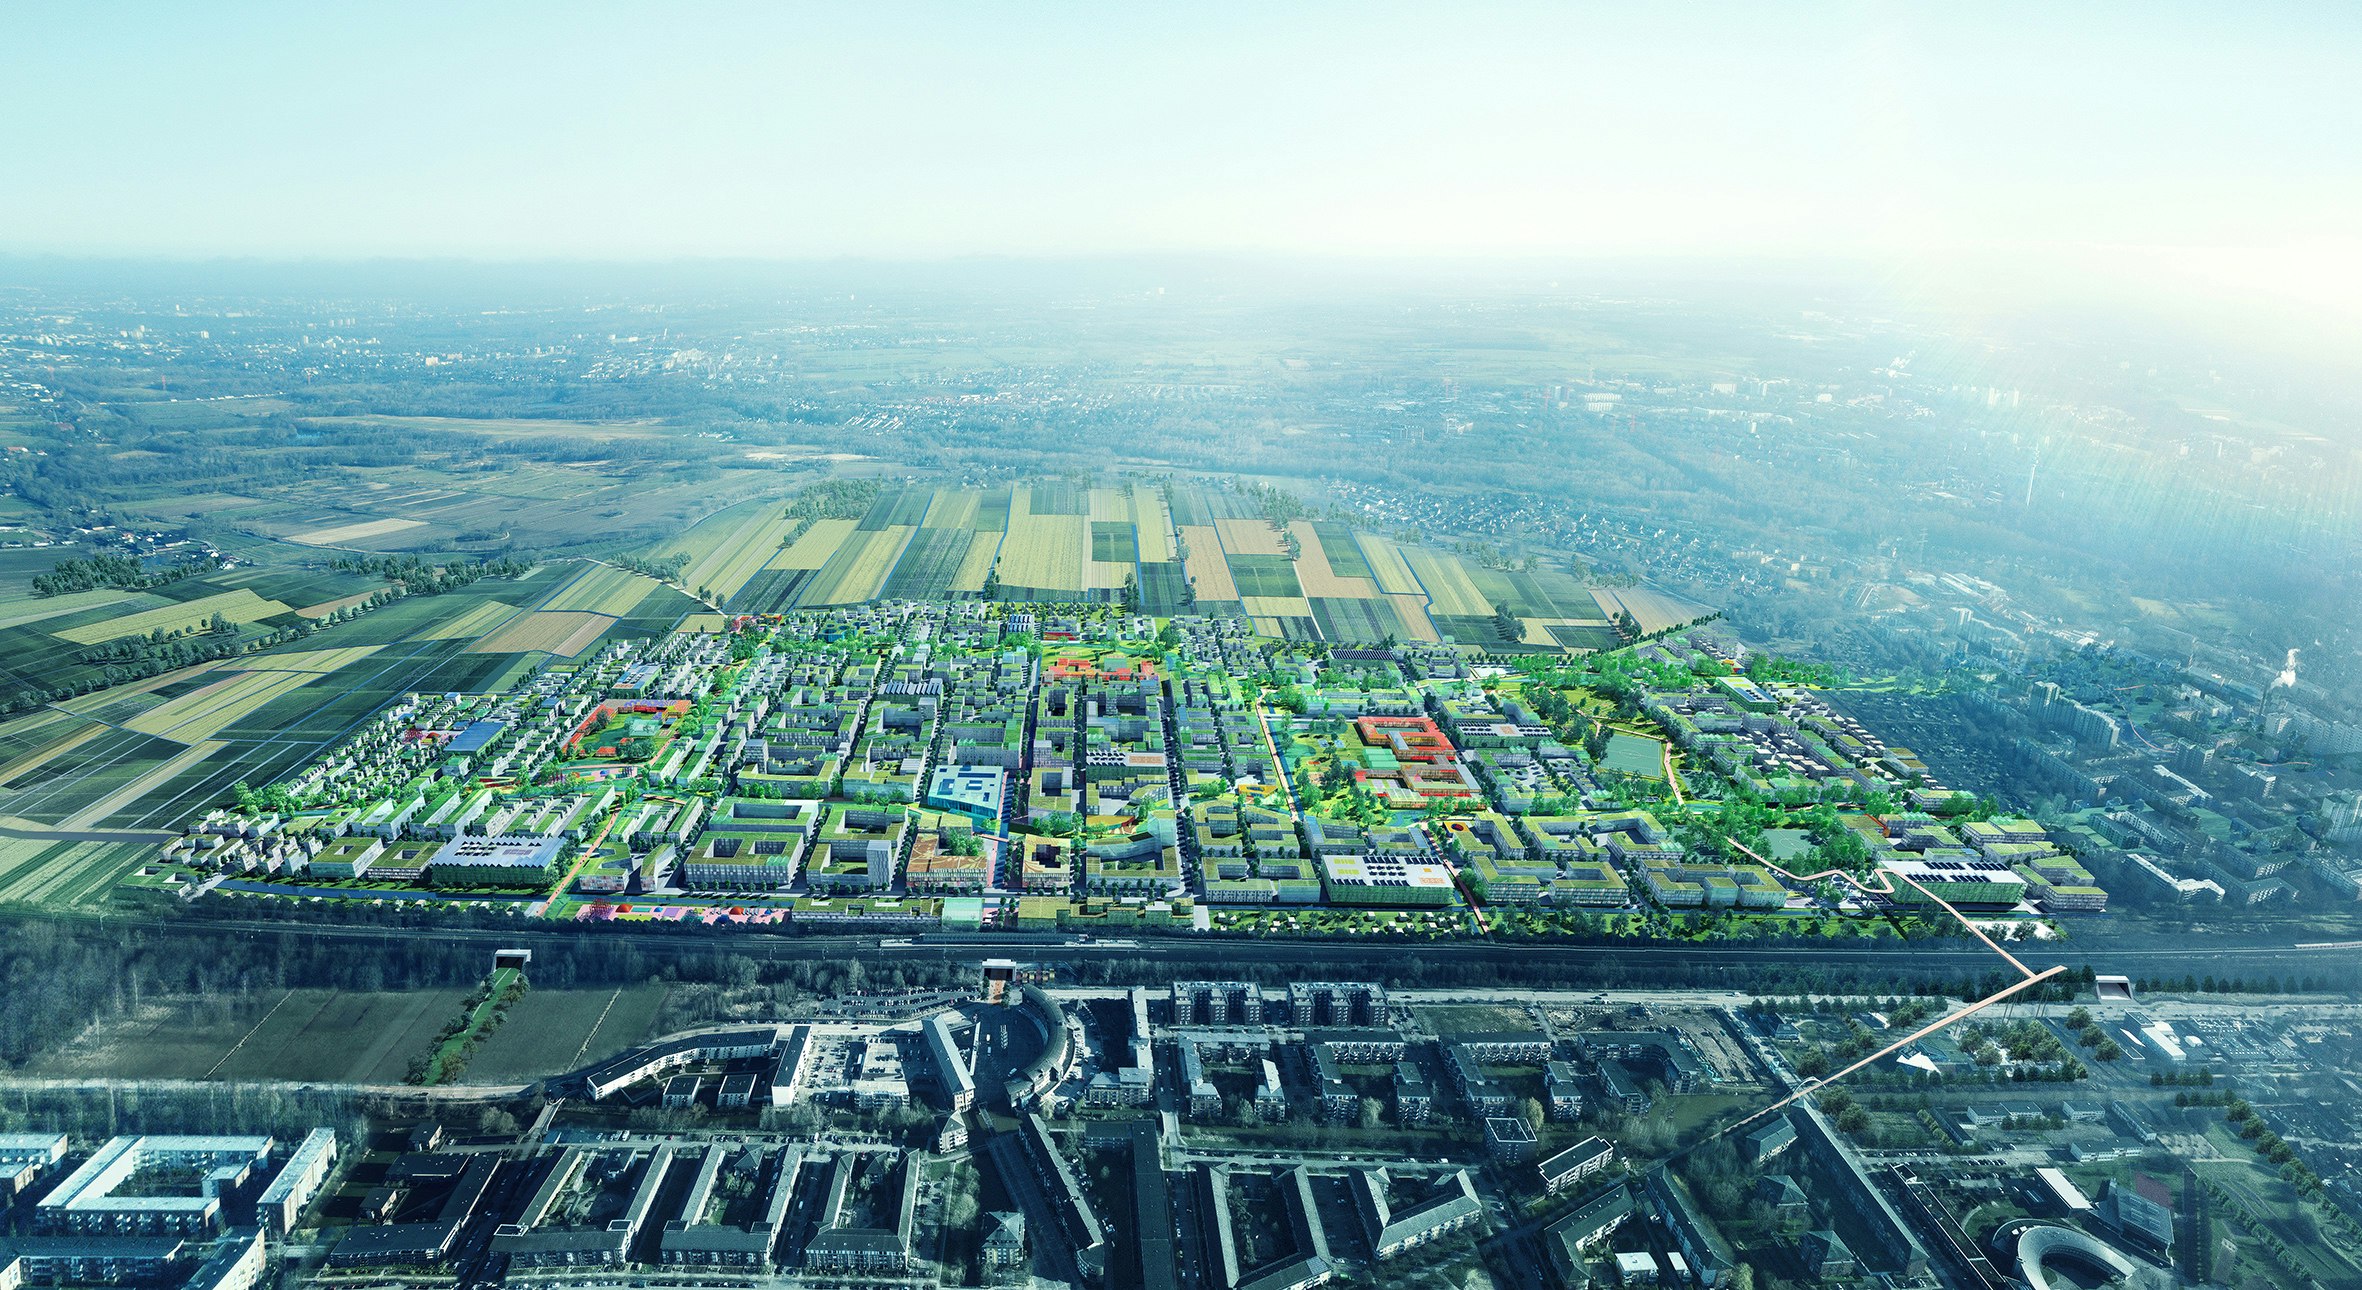 A rendering of how the Connected City outside of Hamburg will look like once completed